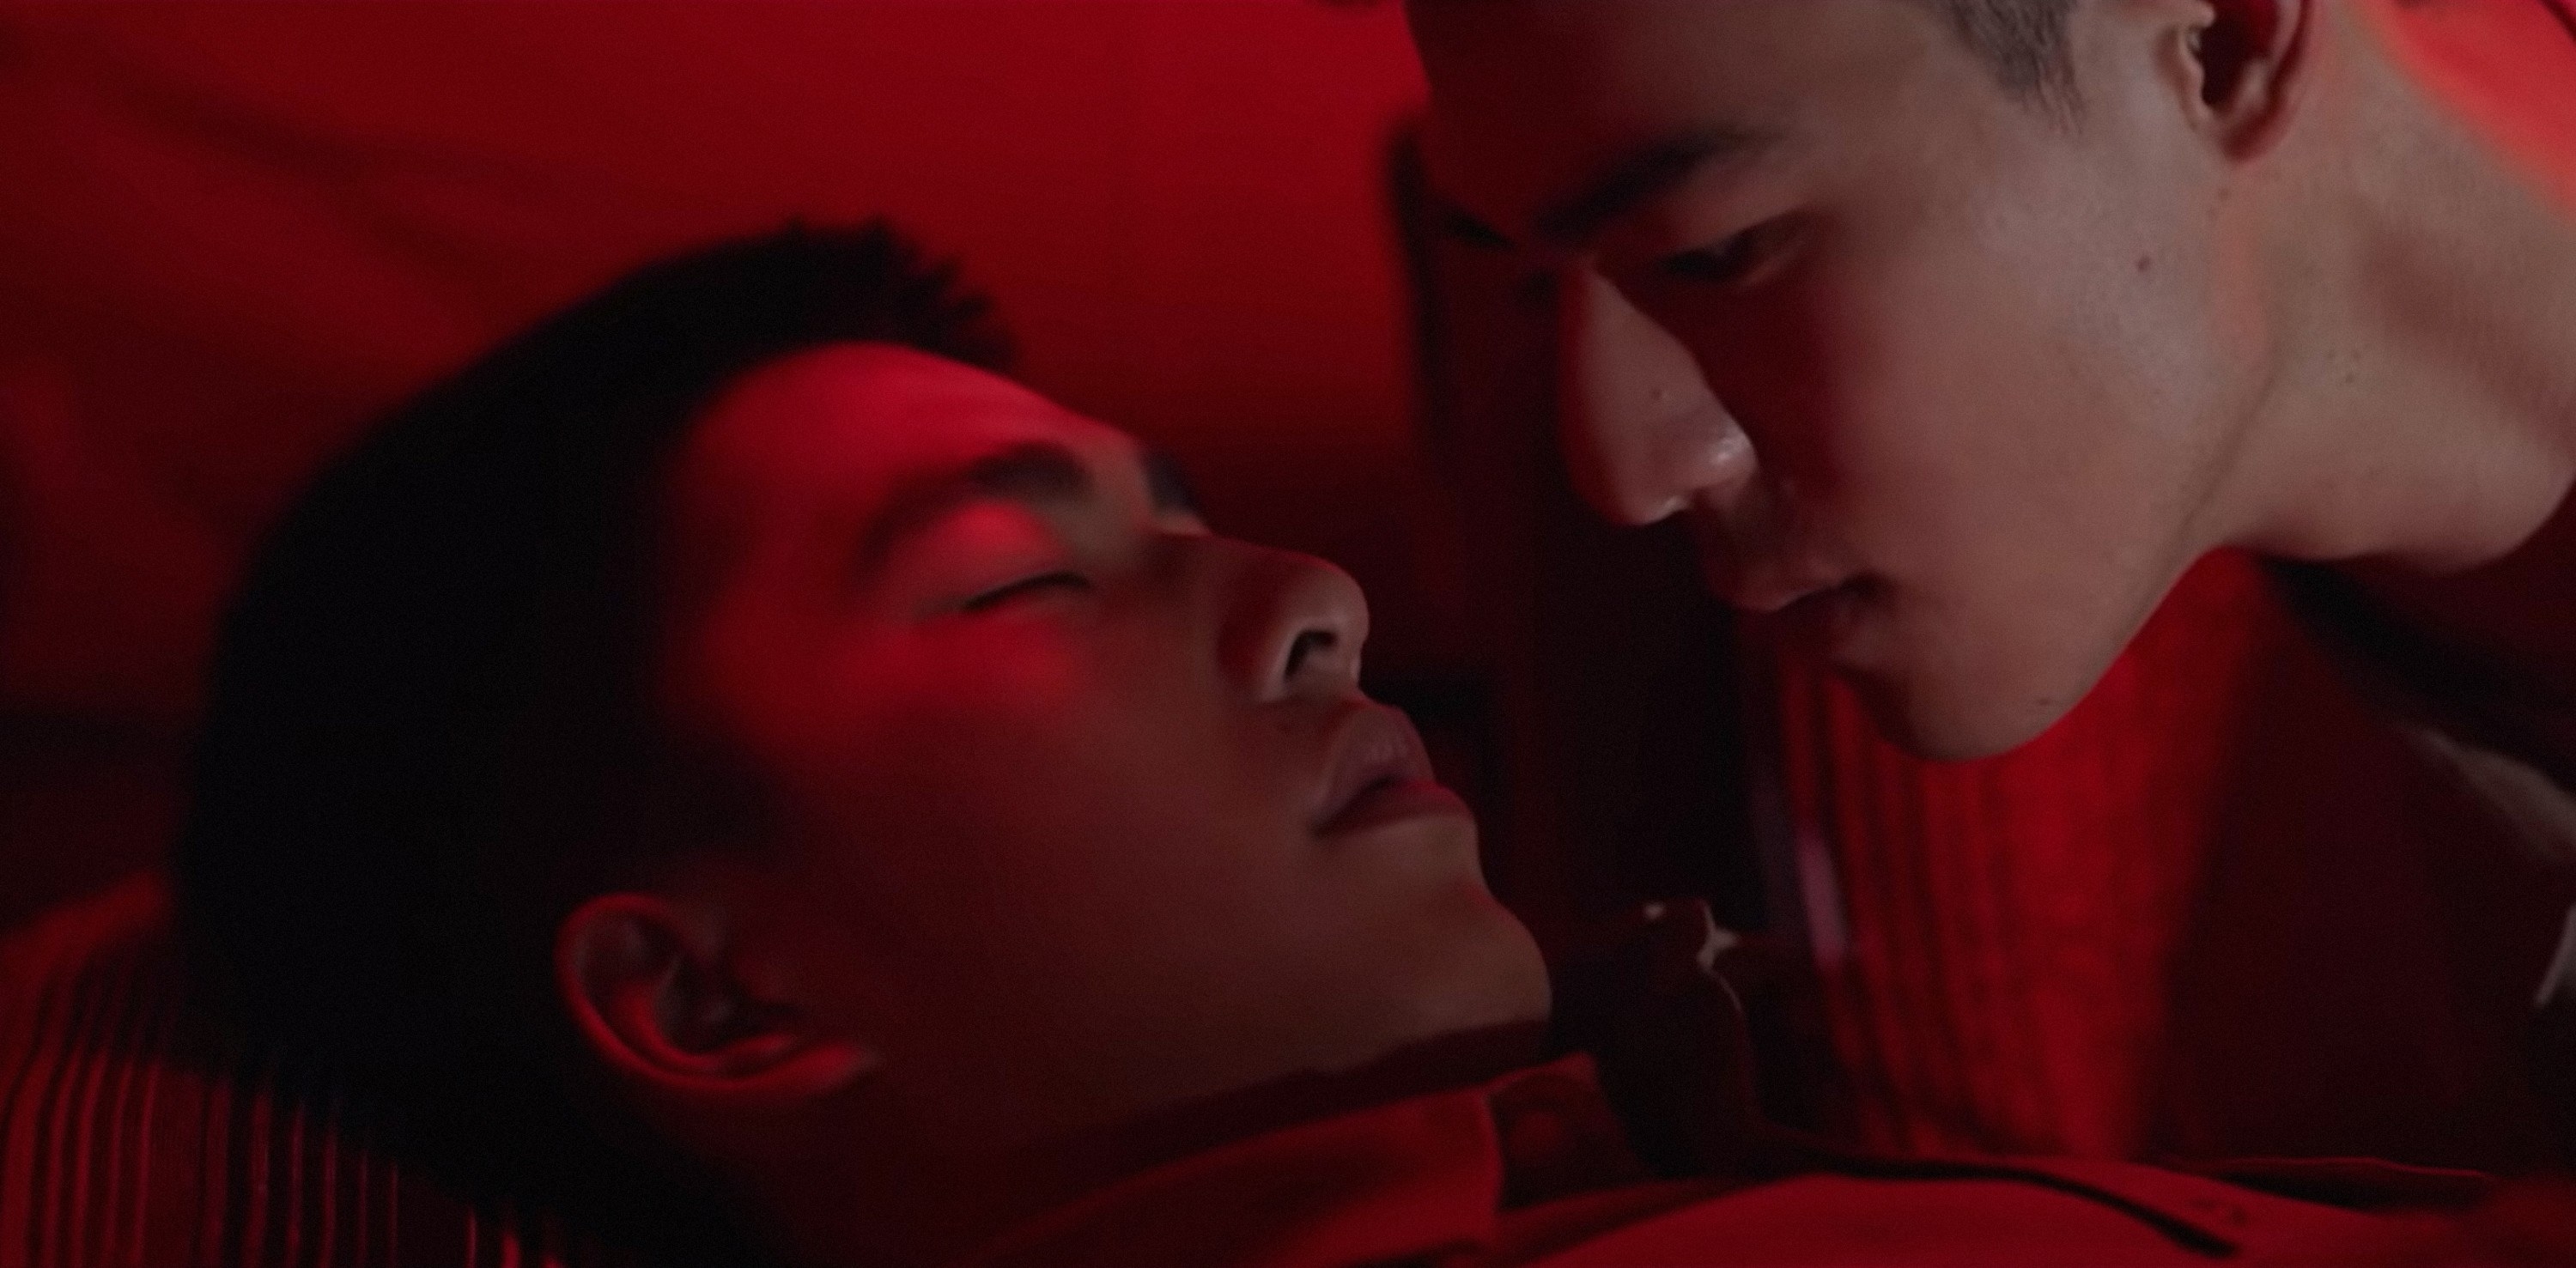 Tseng Jing-Hua and Edward Chen in &quot;Your Name Engraved Herein&quot;